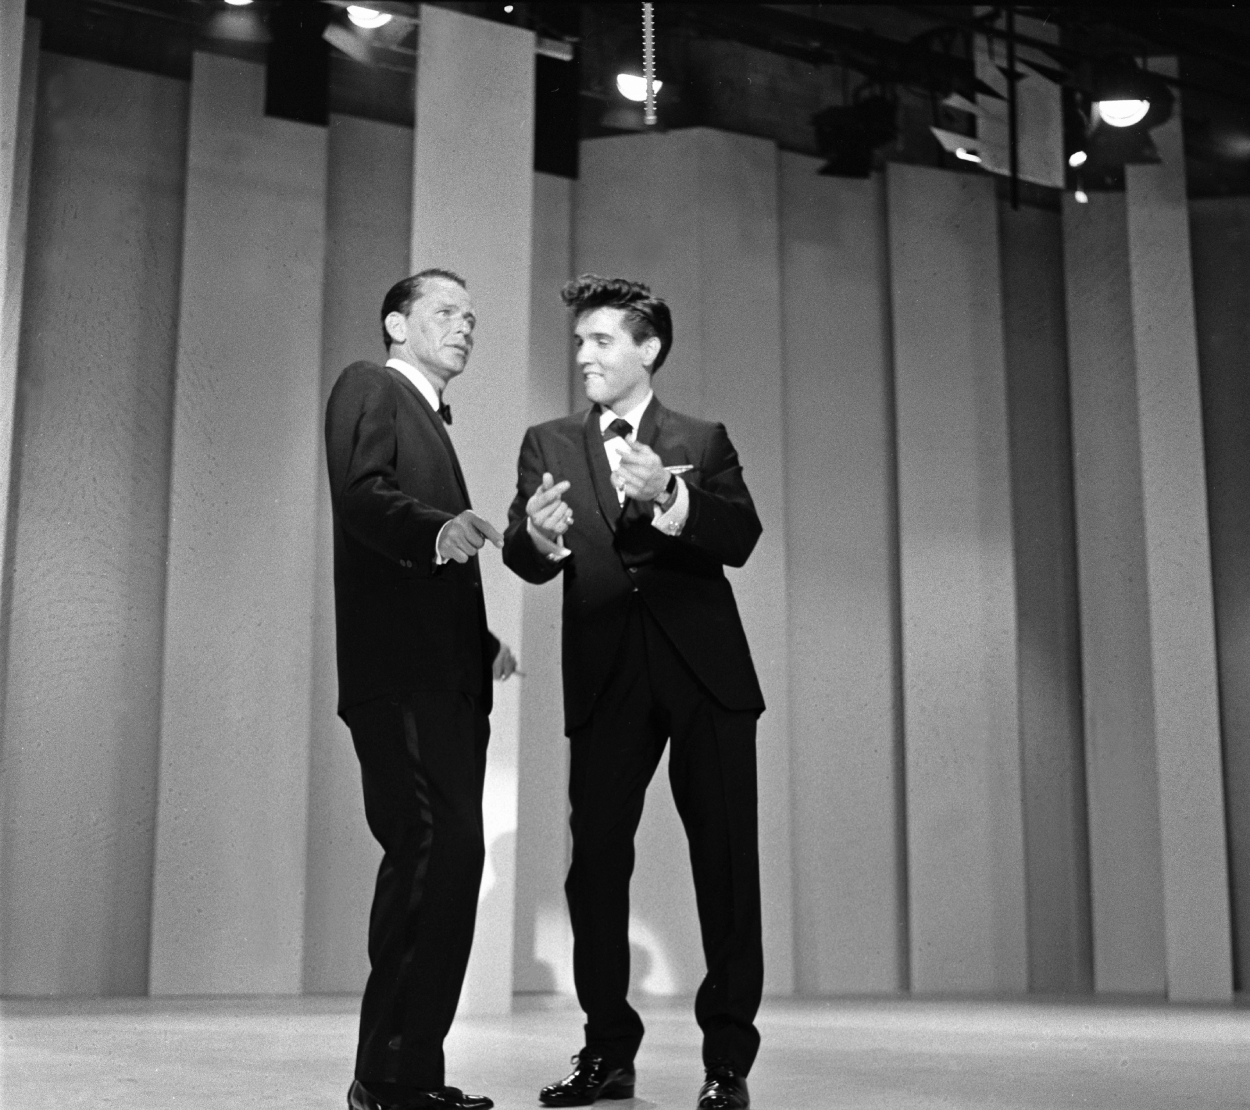 Frank Sinatra Hated Rock and Roll But Still Performed With Elvis Presley